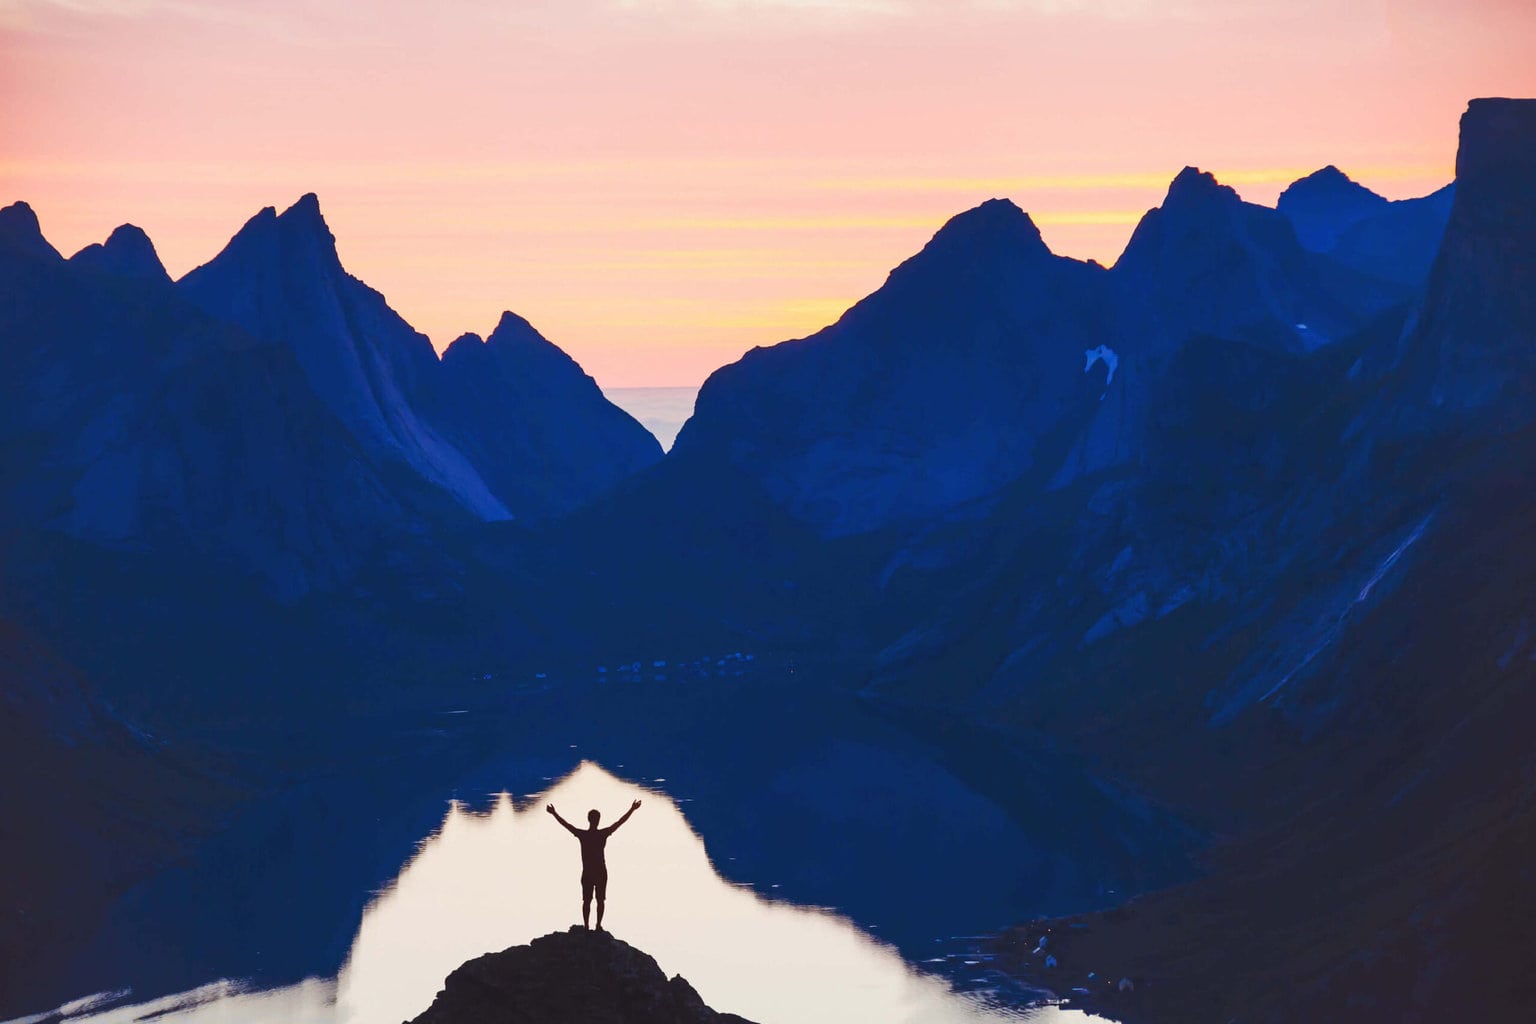 ilhouette of person with raised hands on beautiful mountain landscape at sunset